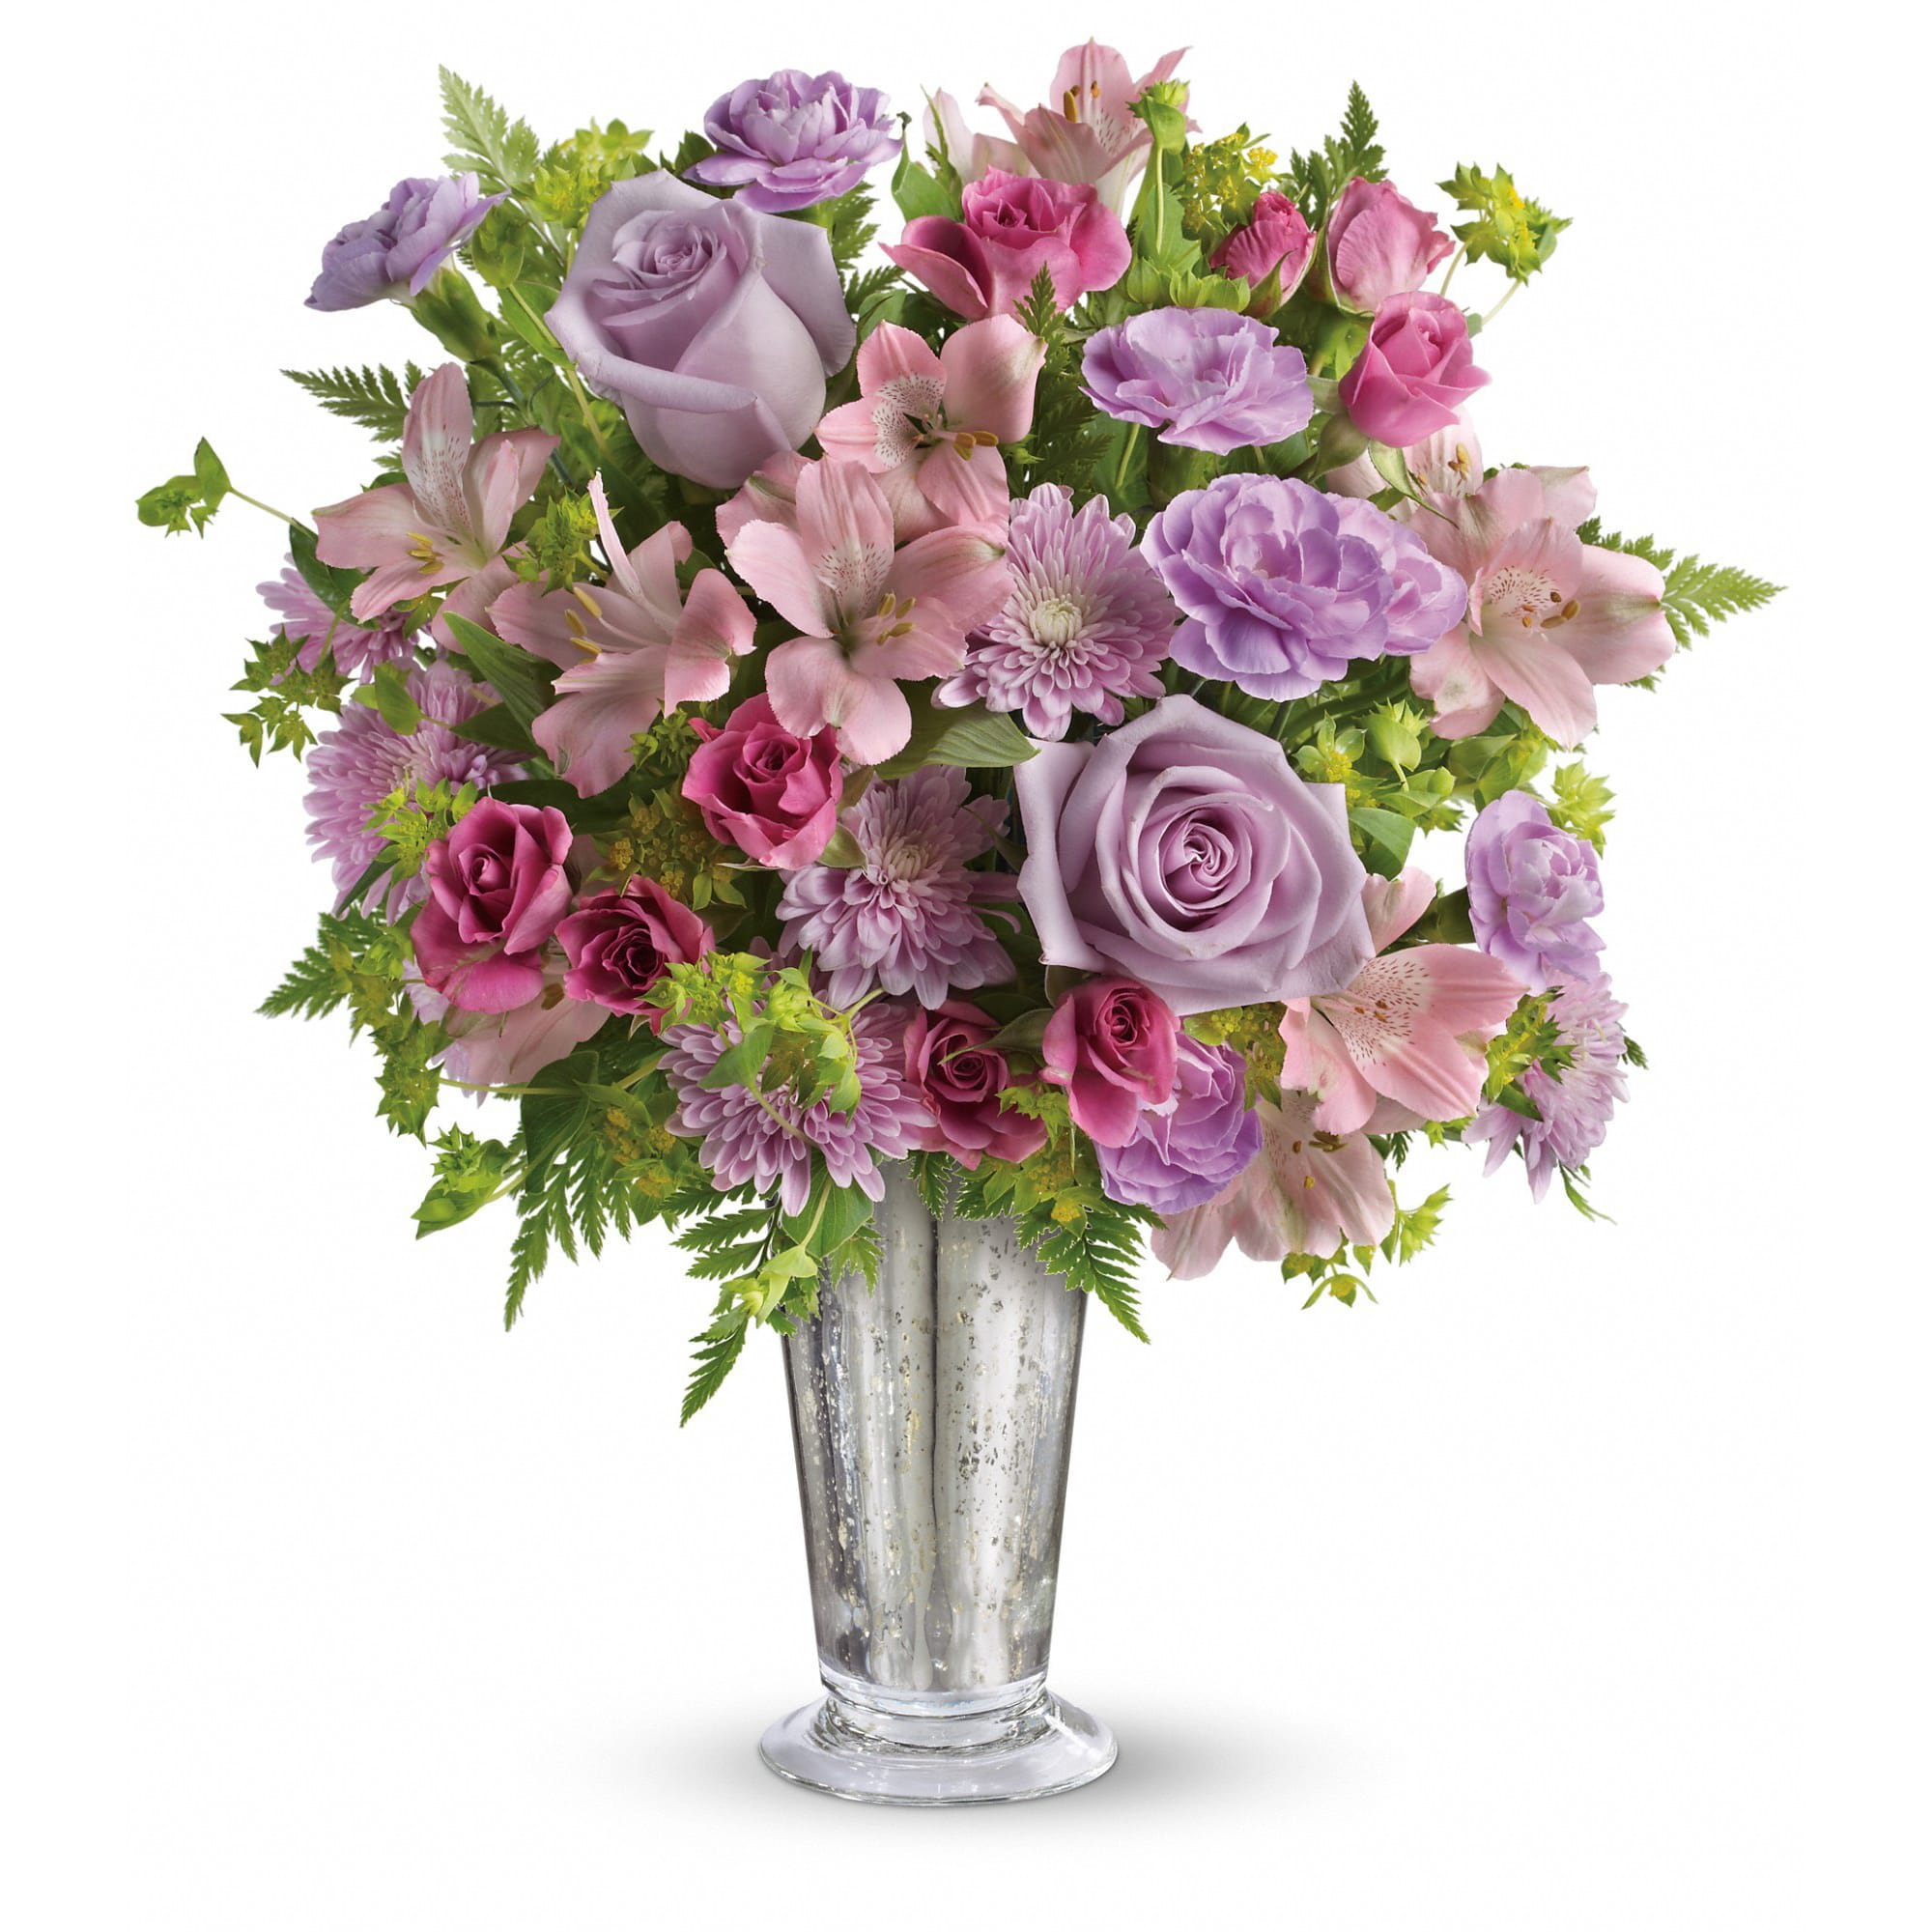 Teleflora's Sheer Delight Bouquet - The essence of femininity. Delight her with flirty-fun lavender and pink blooms presented in a gorgeous Mercury Glass julep vase. It's a gift that will sparkle in her memory forever.  